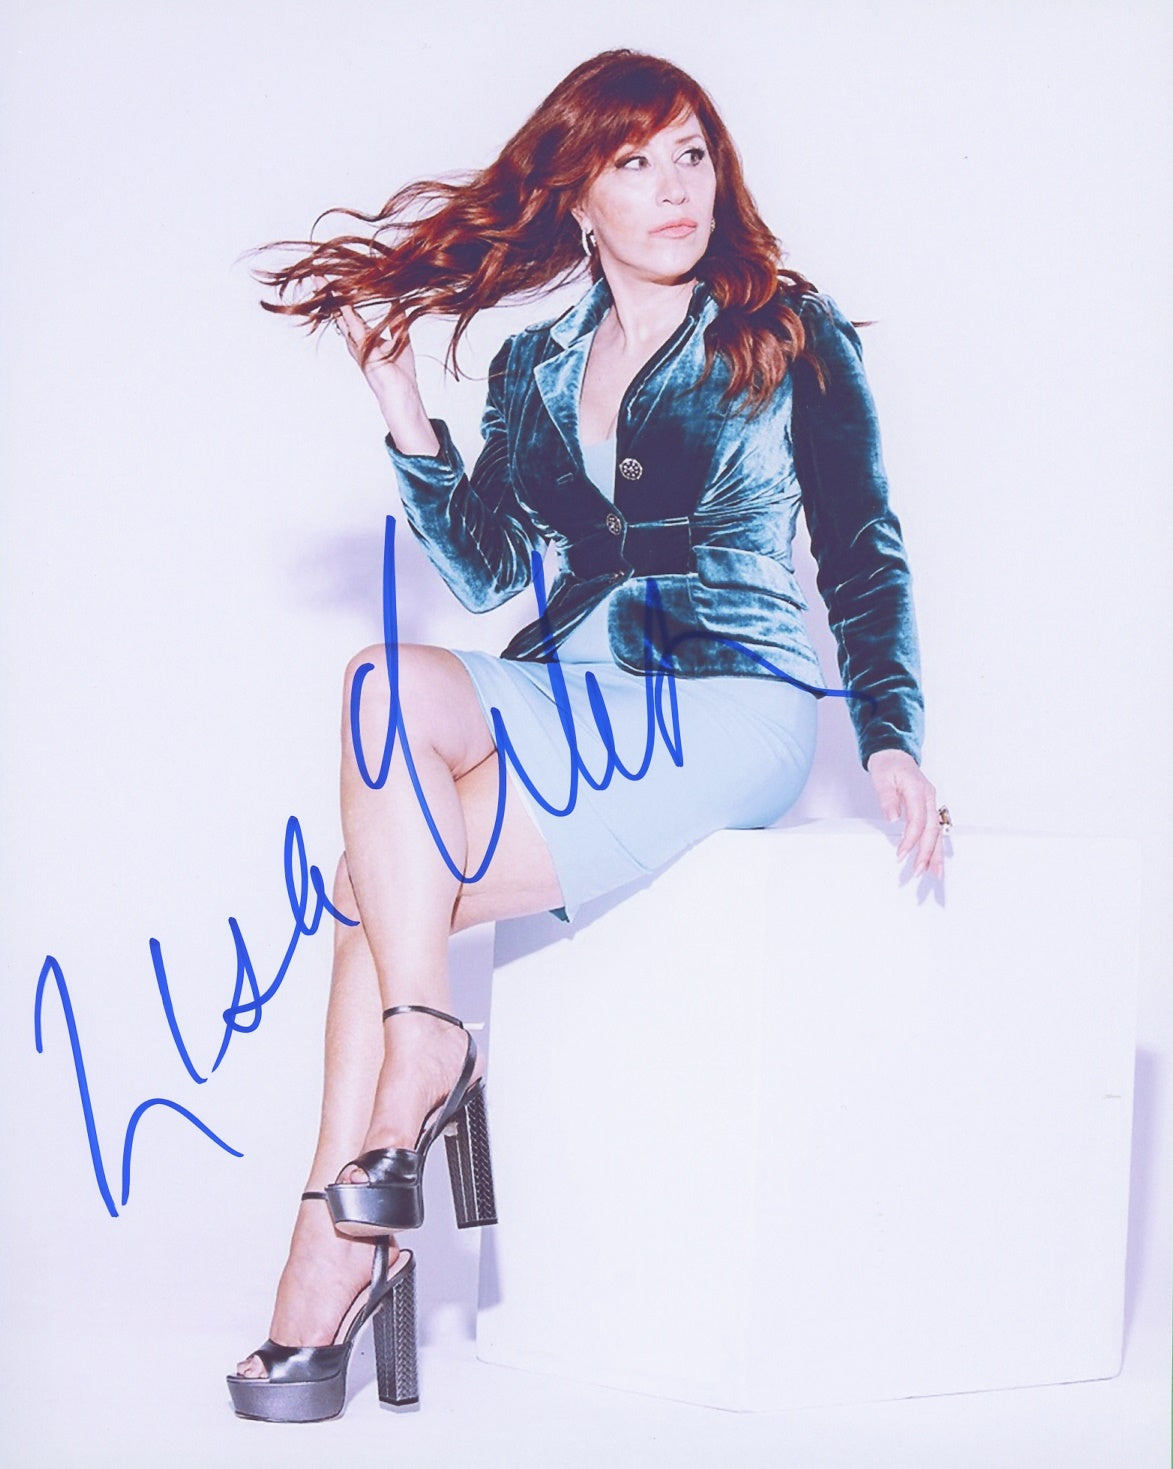 Lisa Ann Walter Signed 8x10 Photo - Video Proof